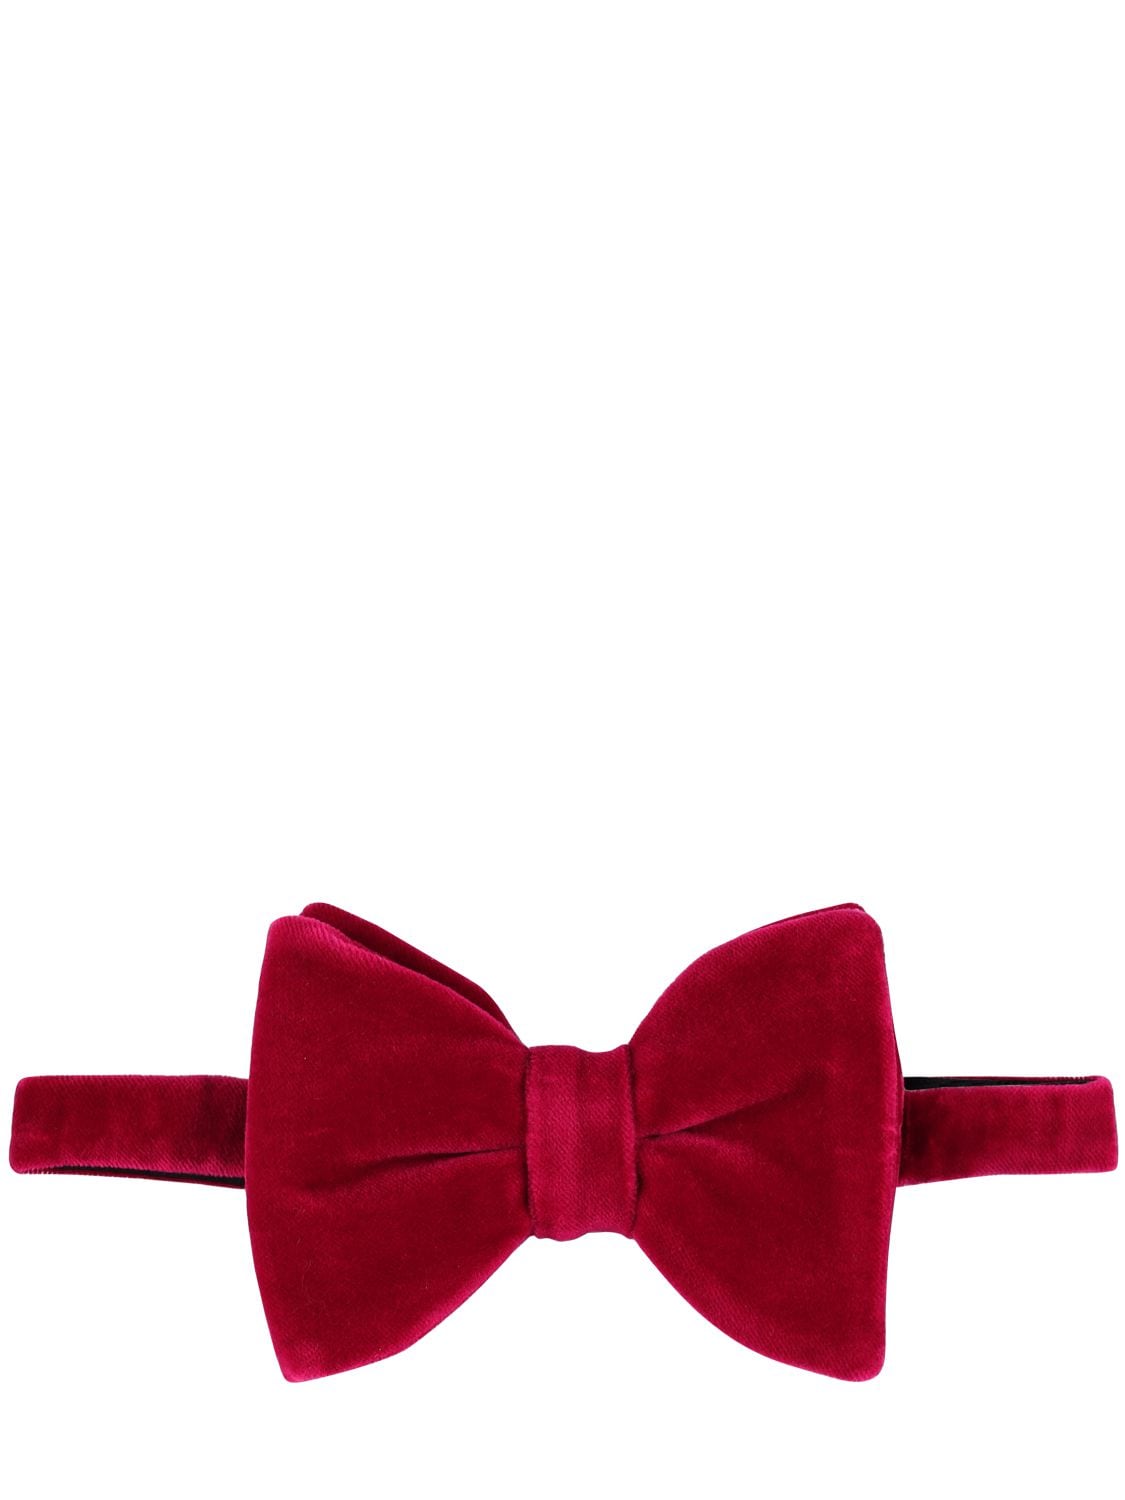 Buttow Mod Bow Tie